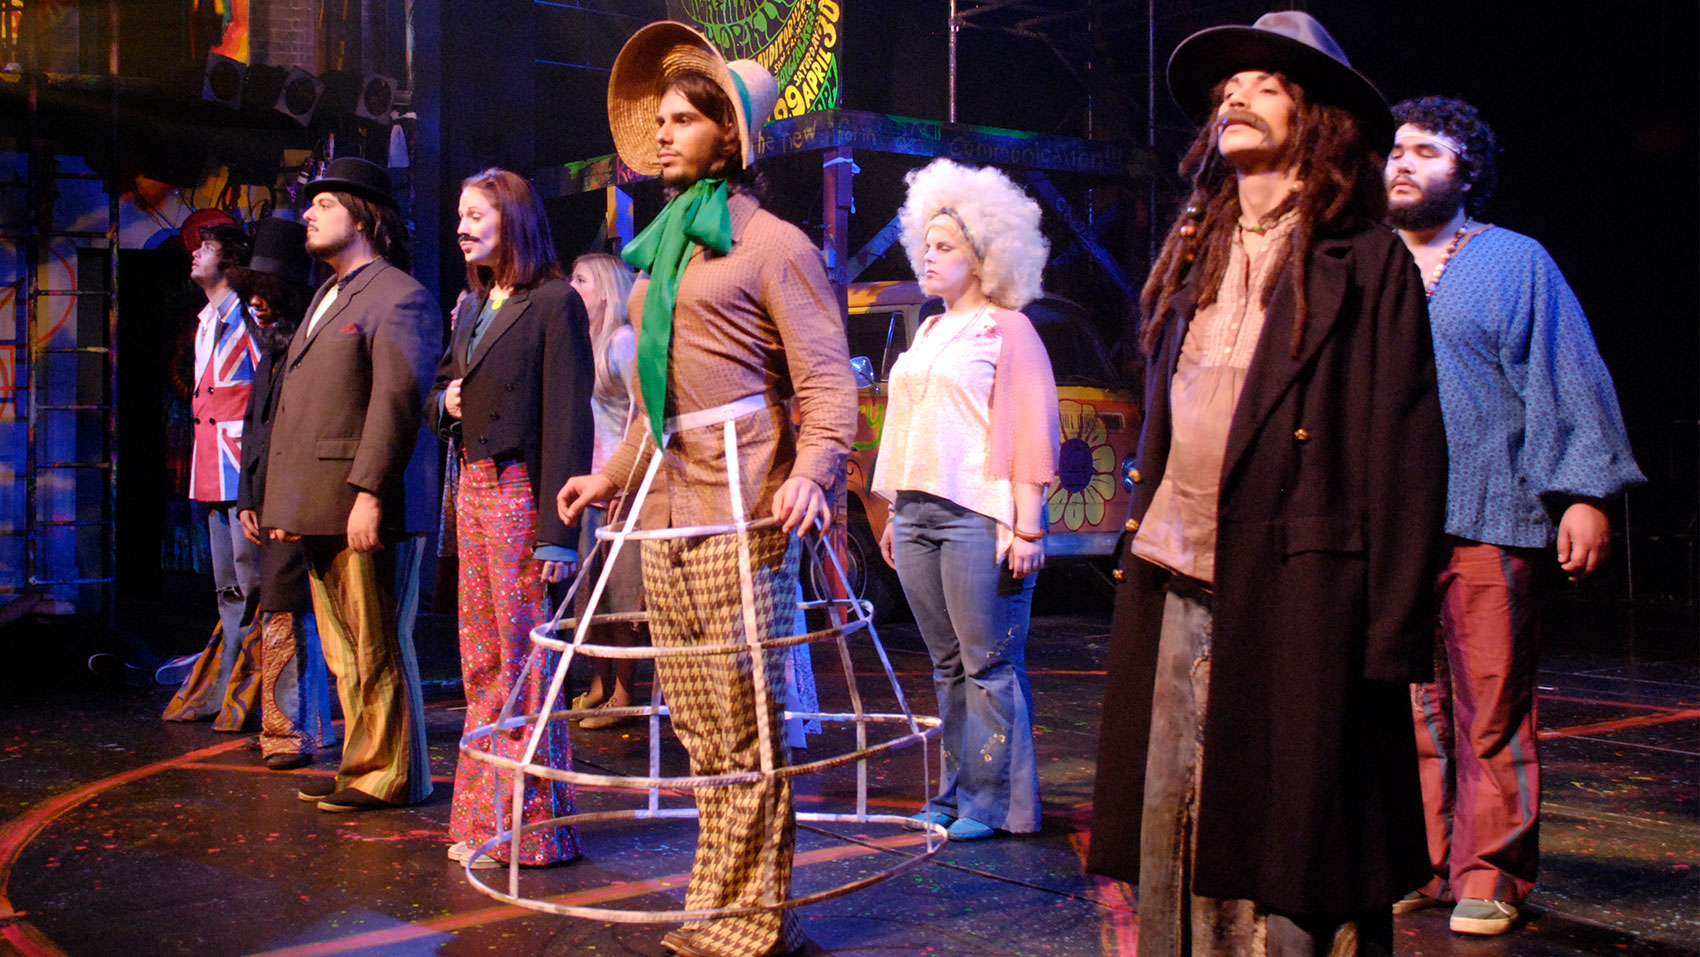 A series of eccentrically costumed characters stand in two lines onstage.